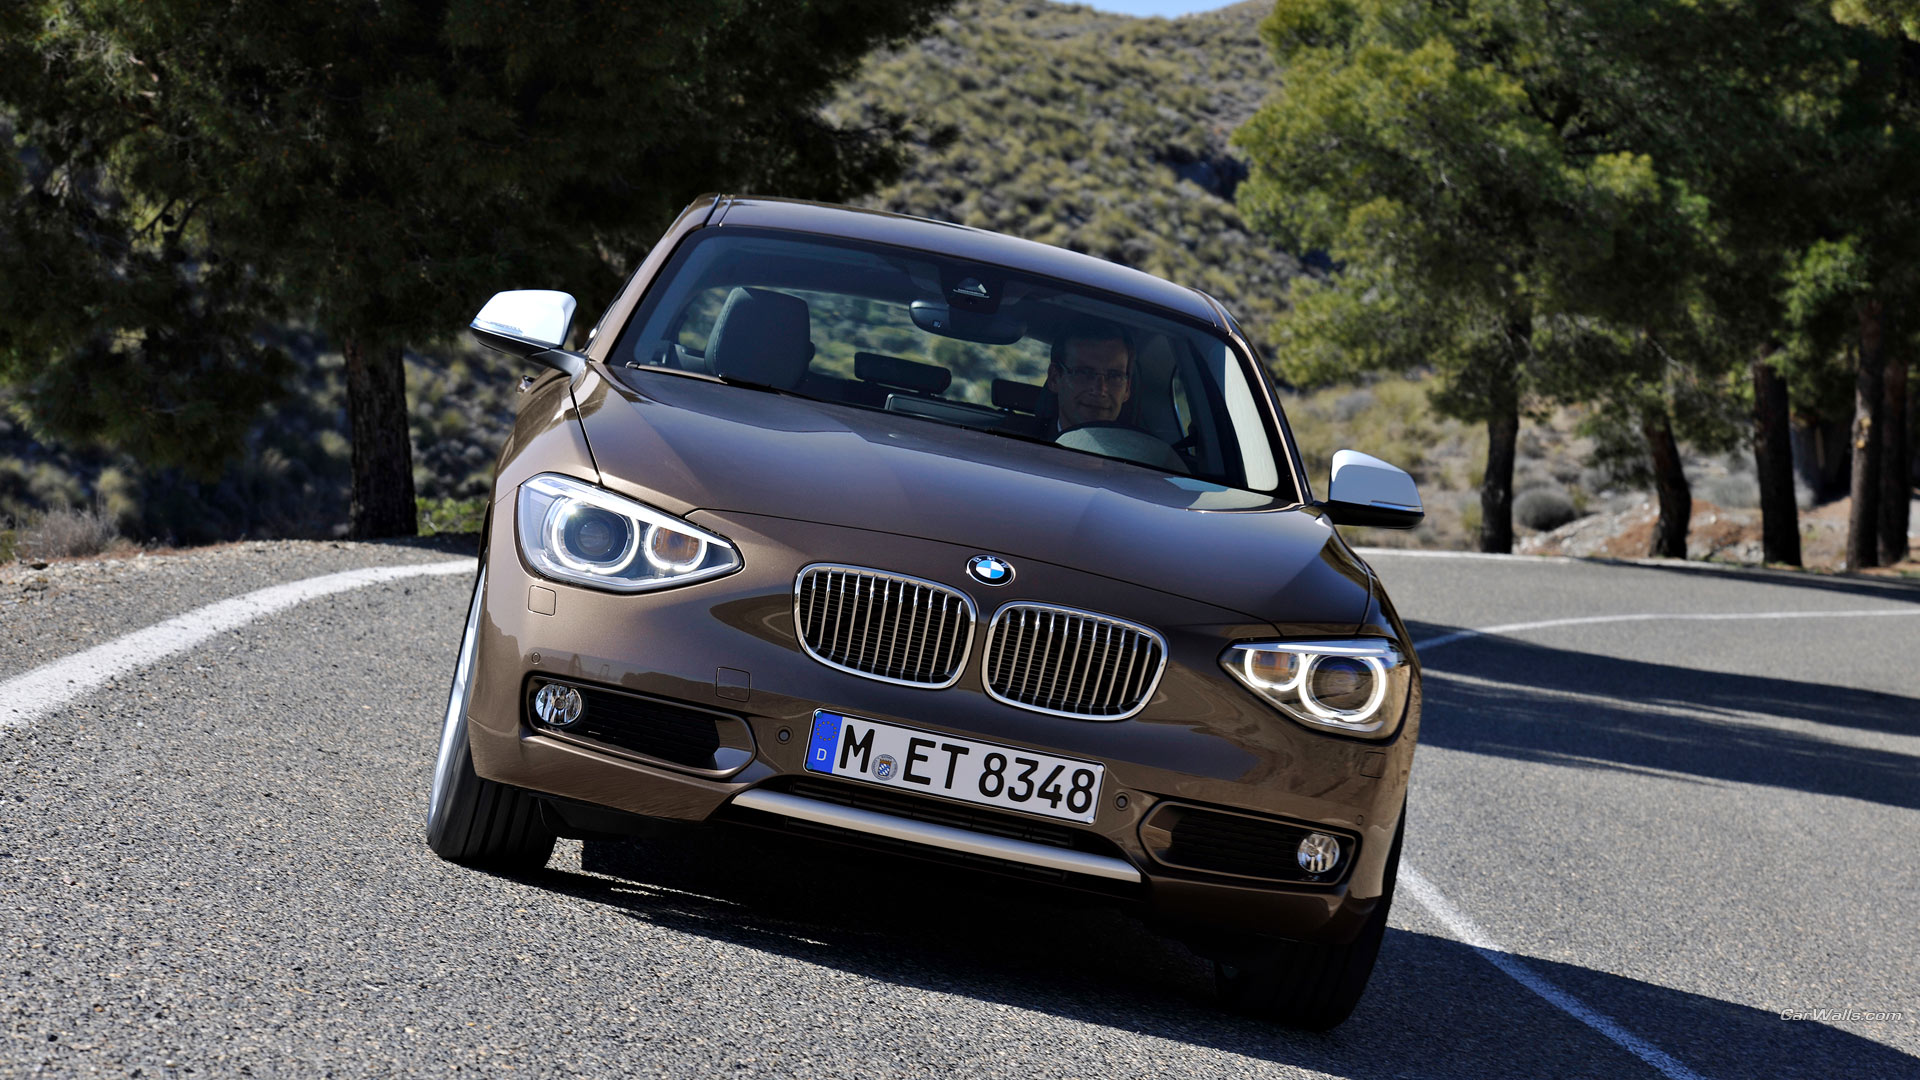 Vehicles BMW 1 Series HD Wallpaper | Background Image